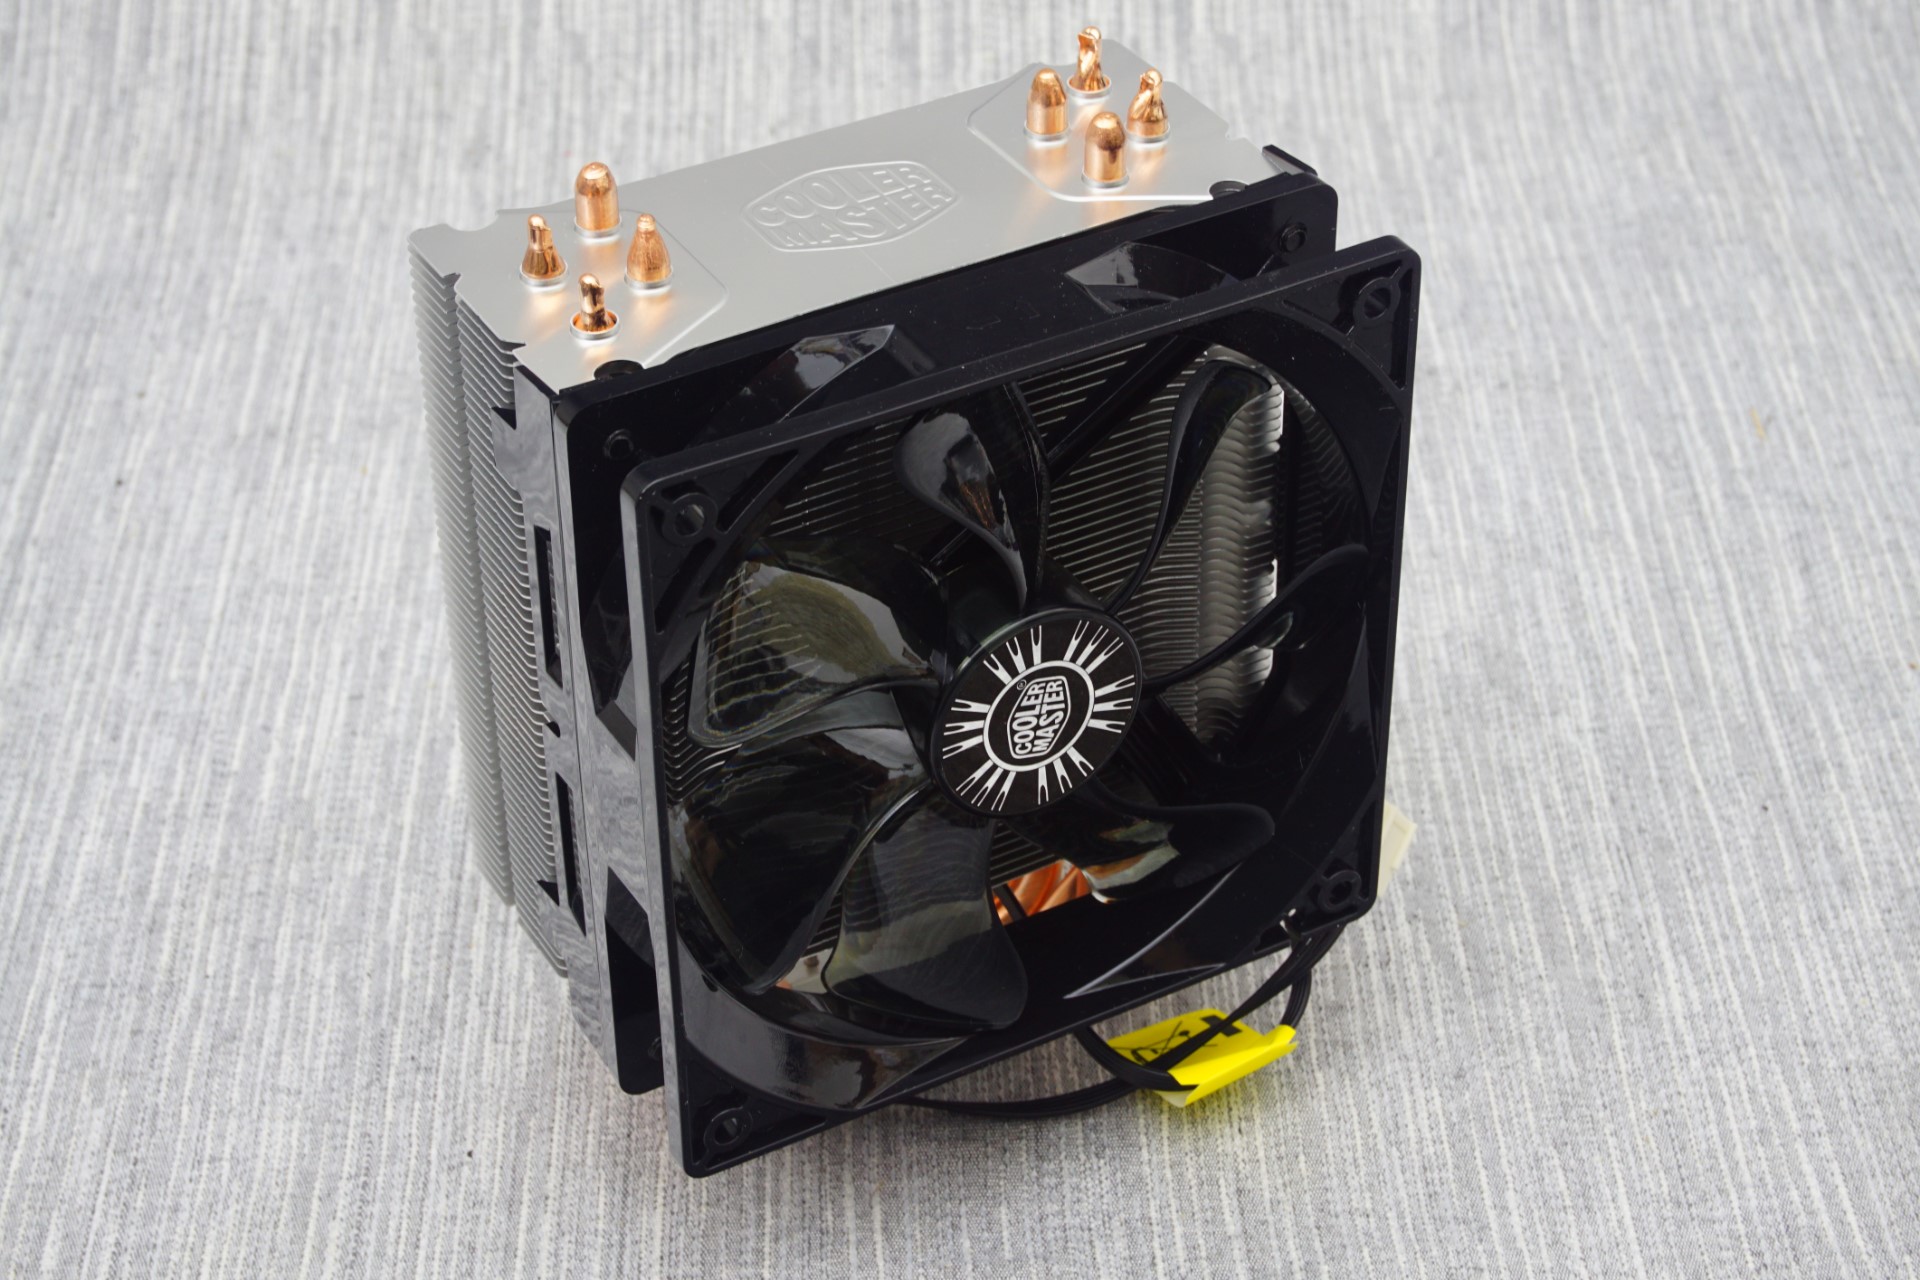 The Cooler Master Evo 212 Battle Of The Cpu Stock Coolers 7x Intel Vs 5x Amd Plus An Evo 212